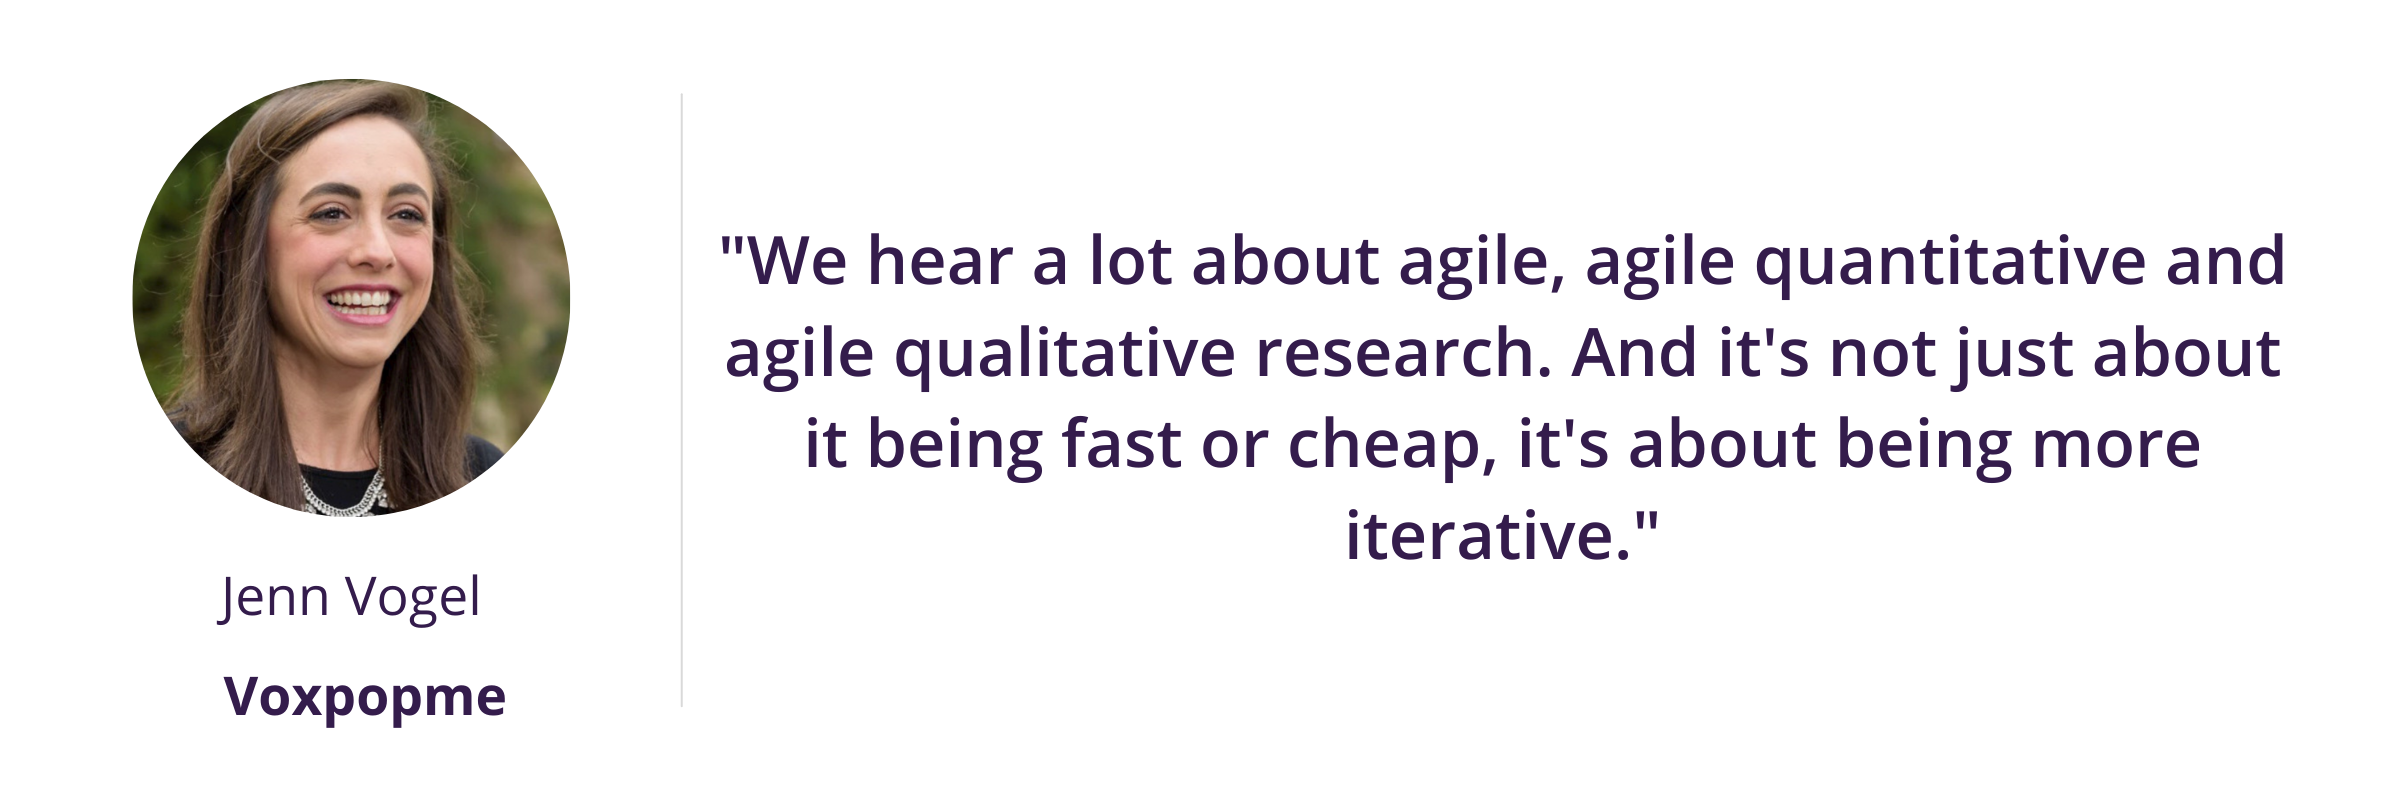 "We hear a lot about agile, agile quantitative and agile qualitative research. And it's not just about it being fast or cheap, it's about being more iterative."